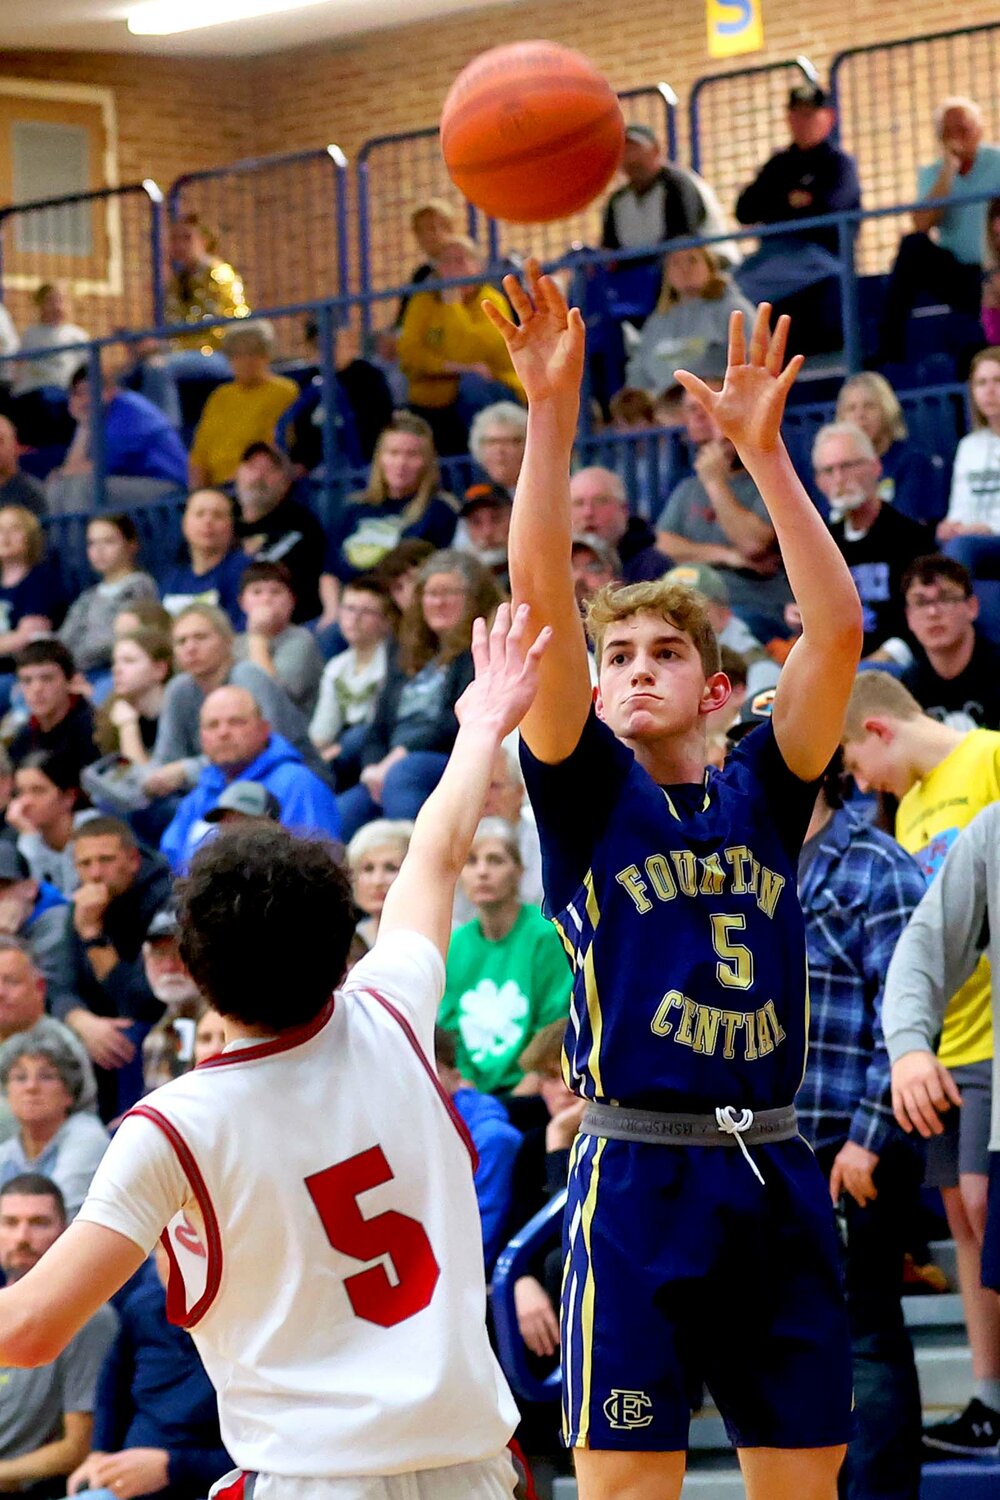 Eli Foxworthy of Fountain Central - shooting a three-pointer